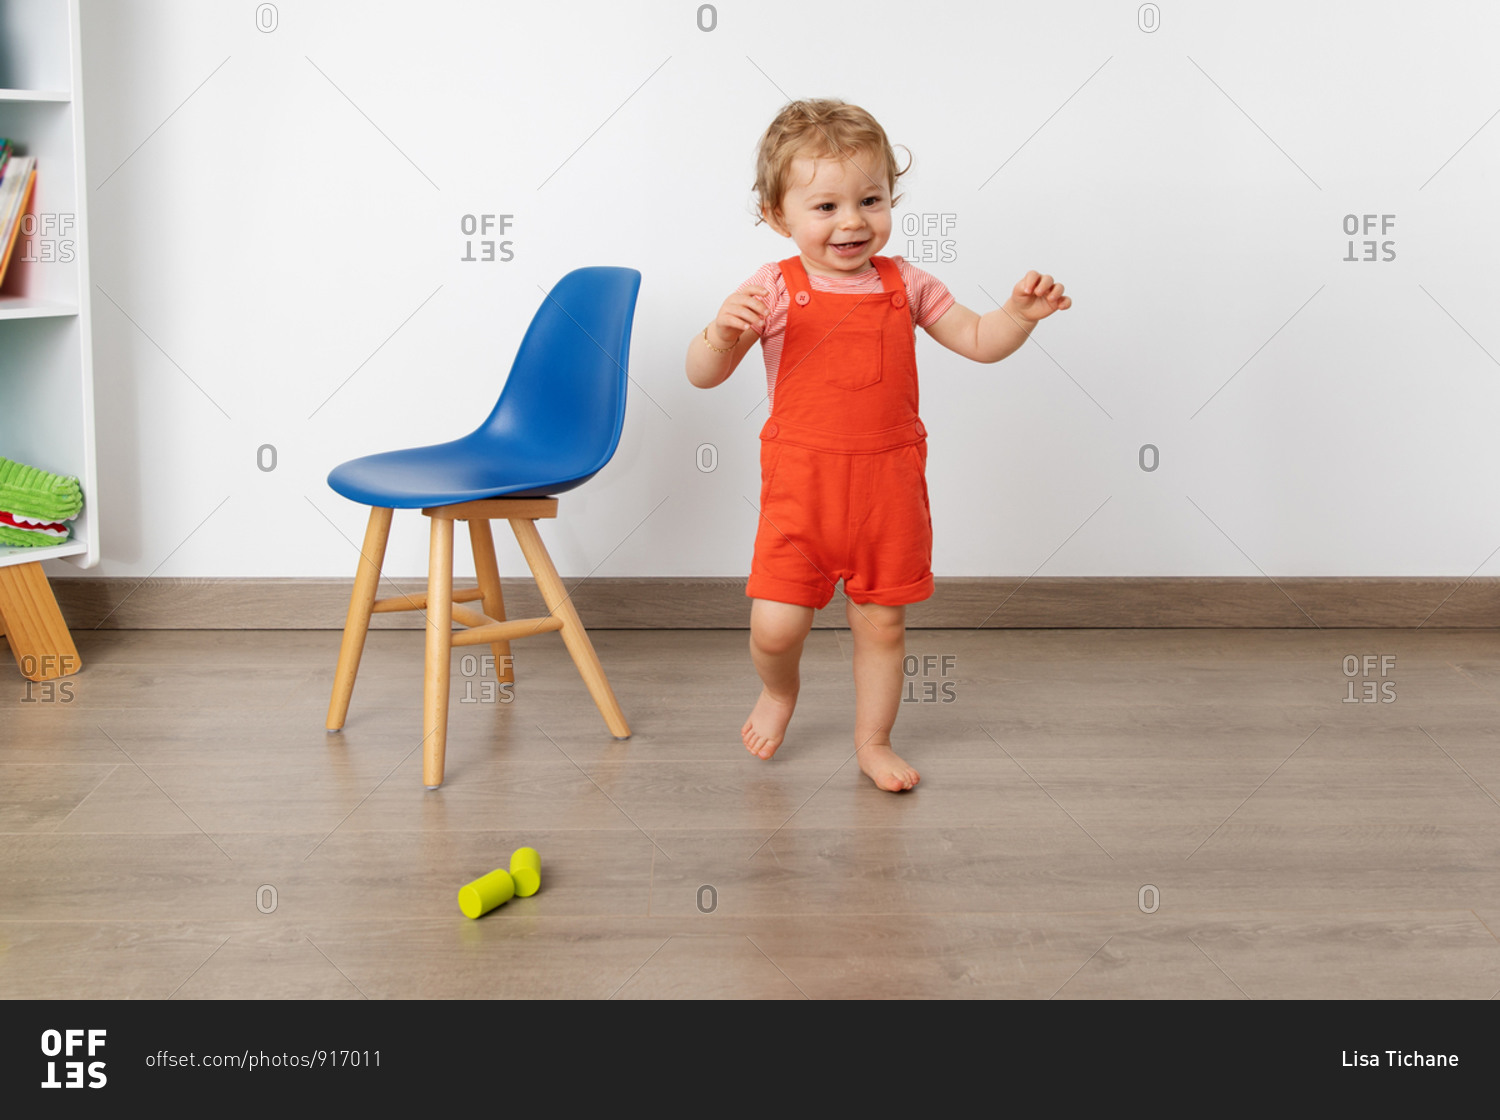 Smiling baby making first steps in playroom